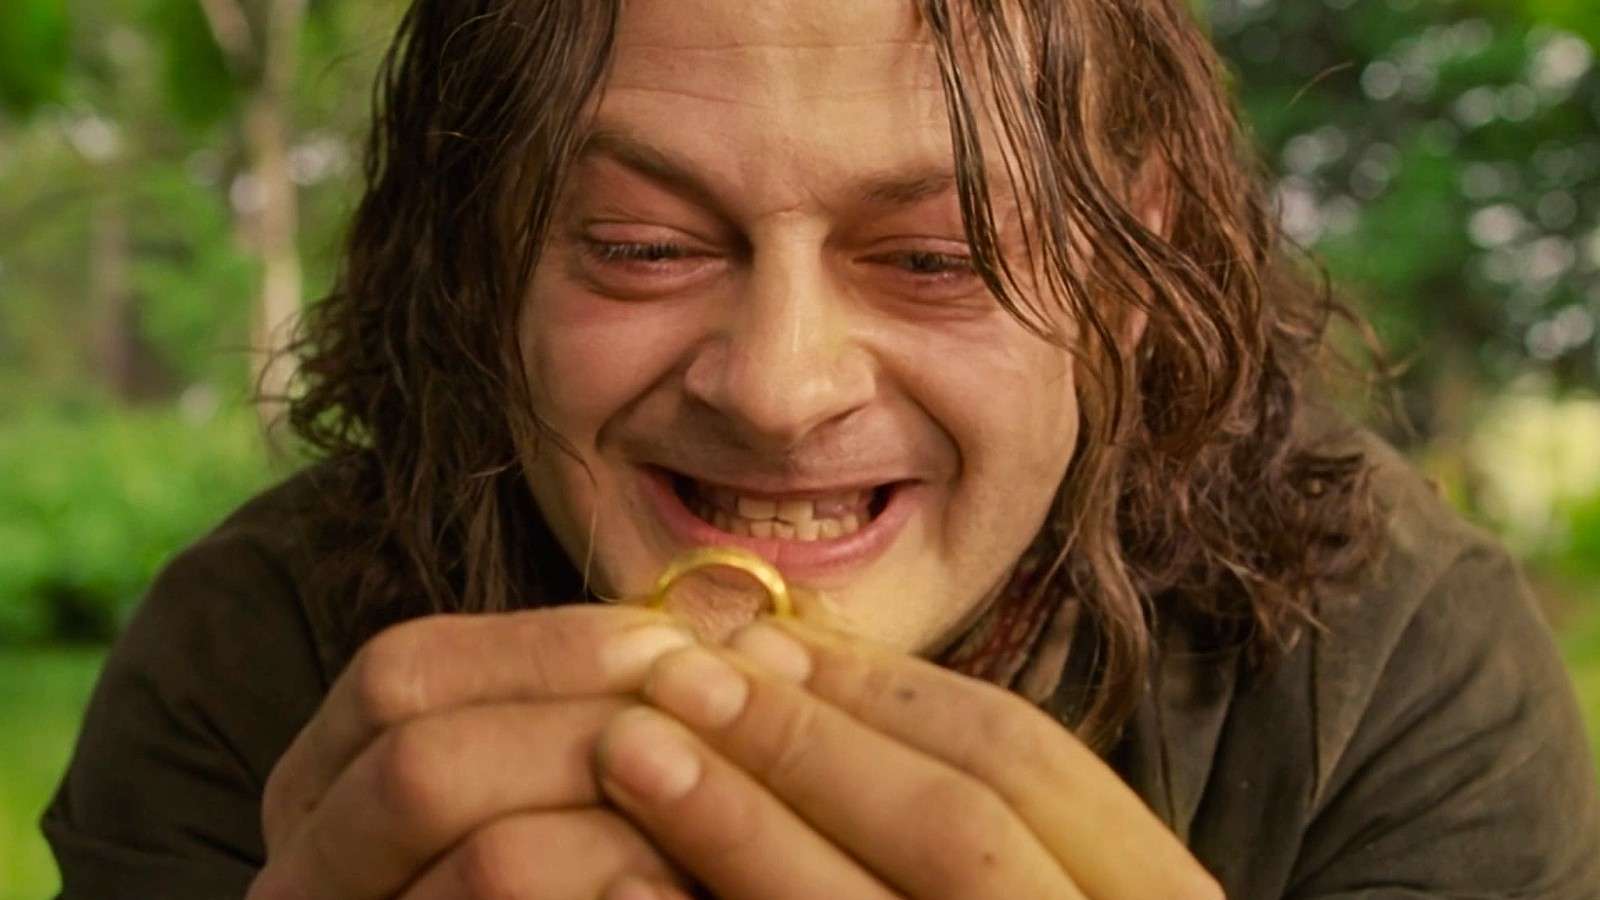 Andy Serkis as Smeagol in Lord of the Rings